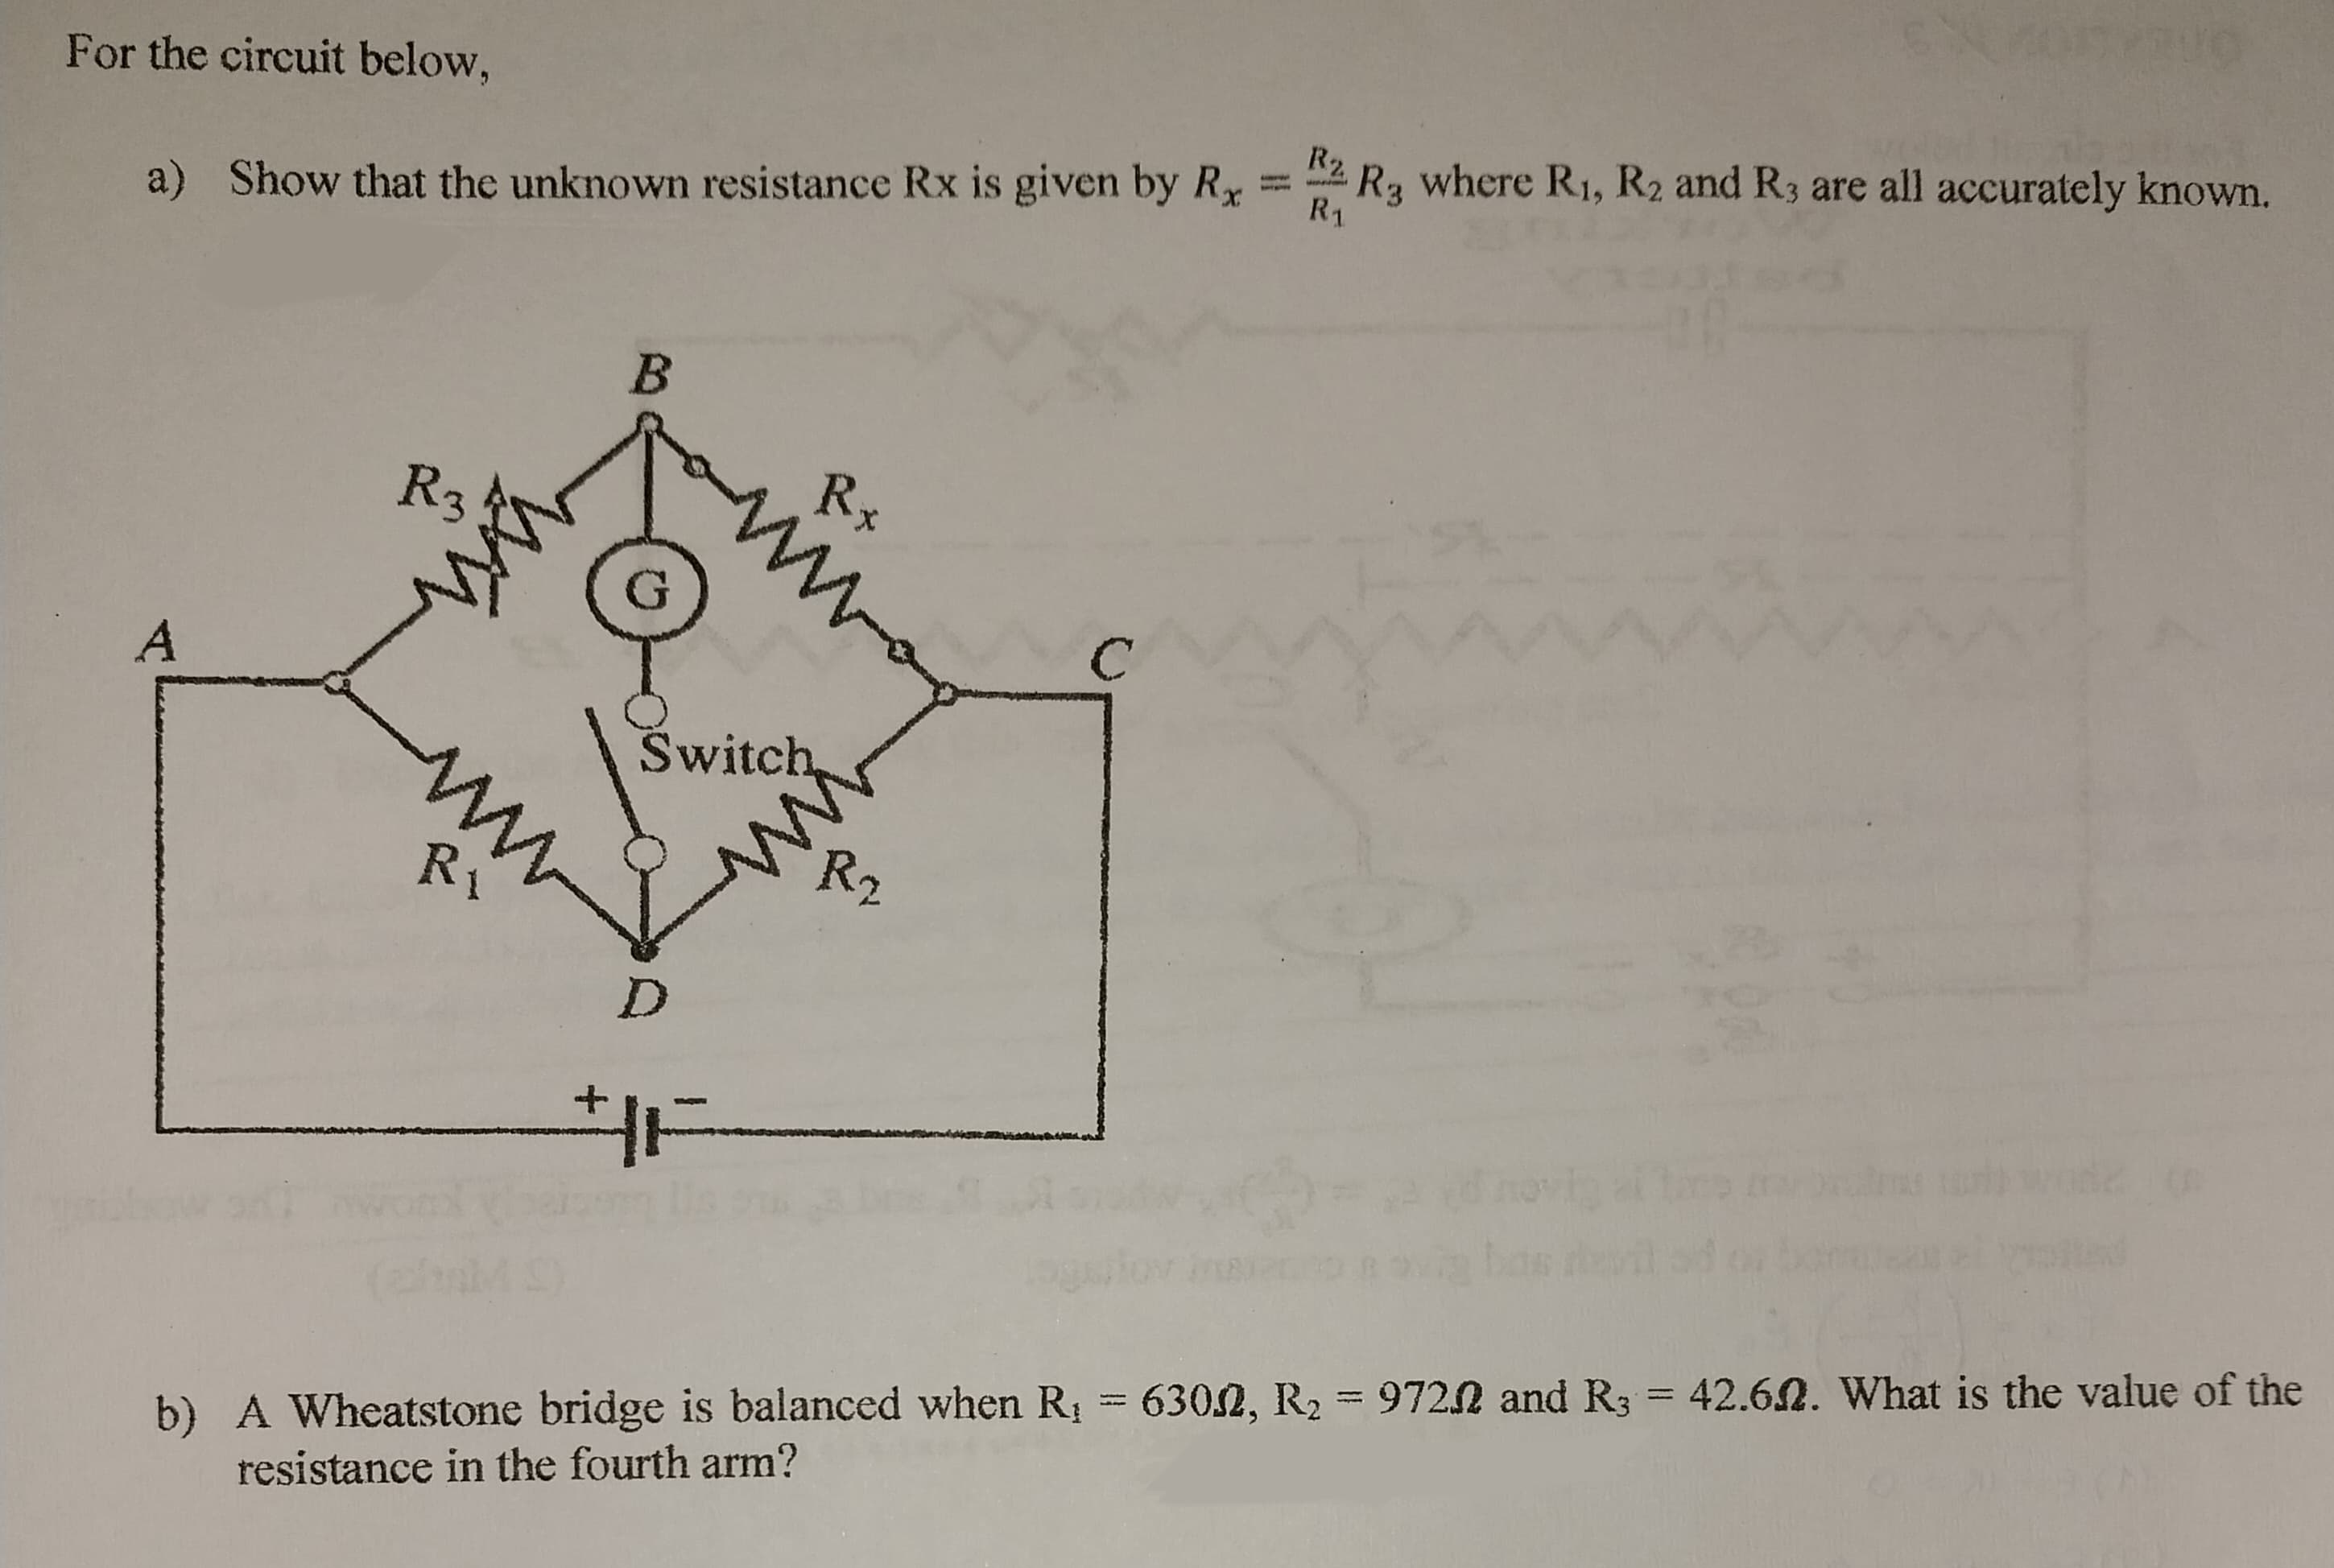 For the circuit below,
a) Show that the unknown resistance Rx is given by Rx
A
R3
ww
ww
Ri
B
Rx
ww
Switch
ww
R₂,
D
HE
R2.
R₁
SYRUO
R3
where R₁, R₂ and R3 are all accurately known.
b) A Wheatstone bridge is balanced when R₁ = 6302, R₂ = 97202 and R3 = 42.62. What is the value of the
resistance in the fourth arm?